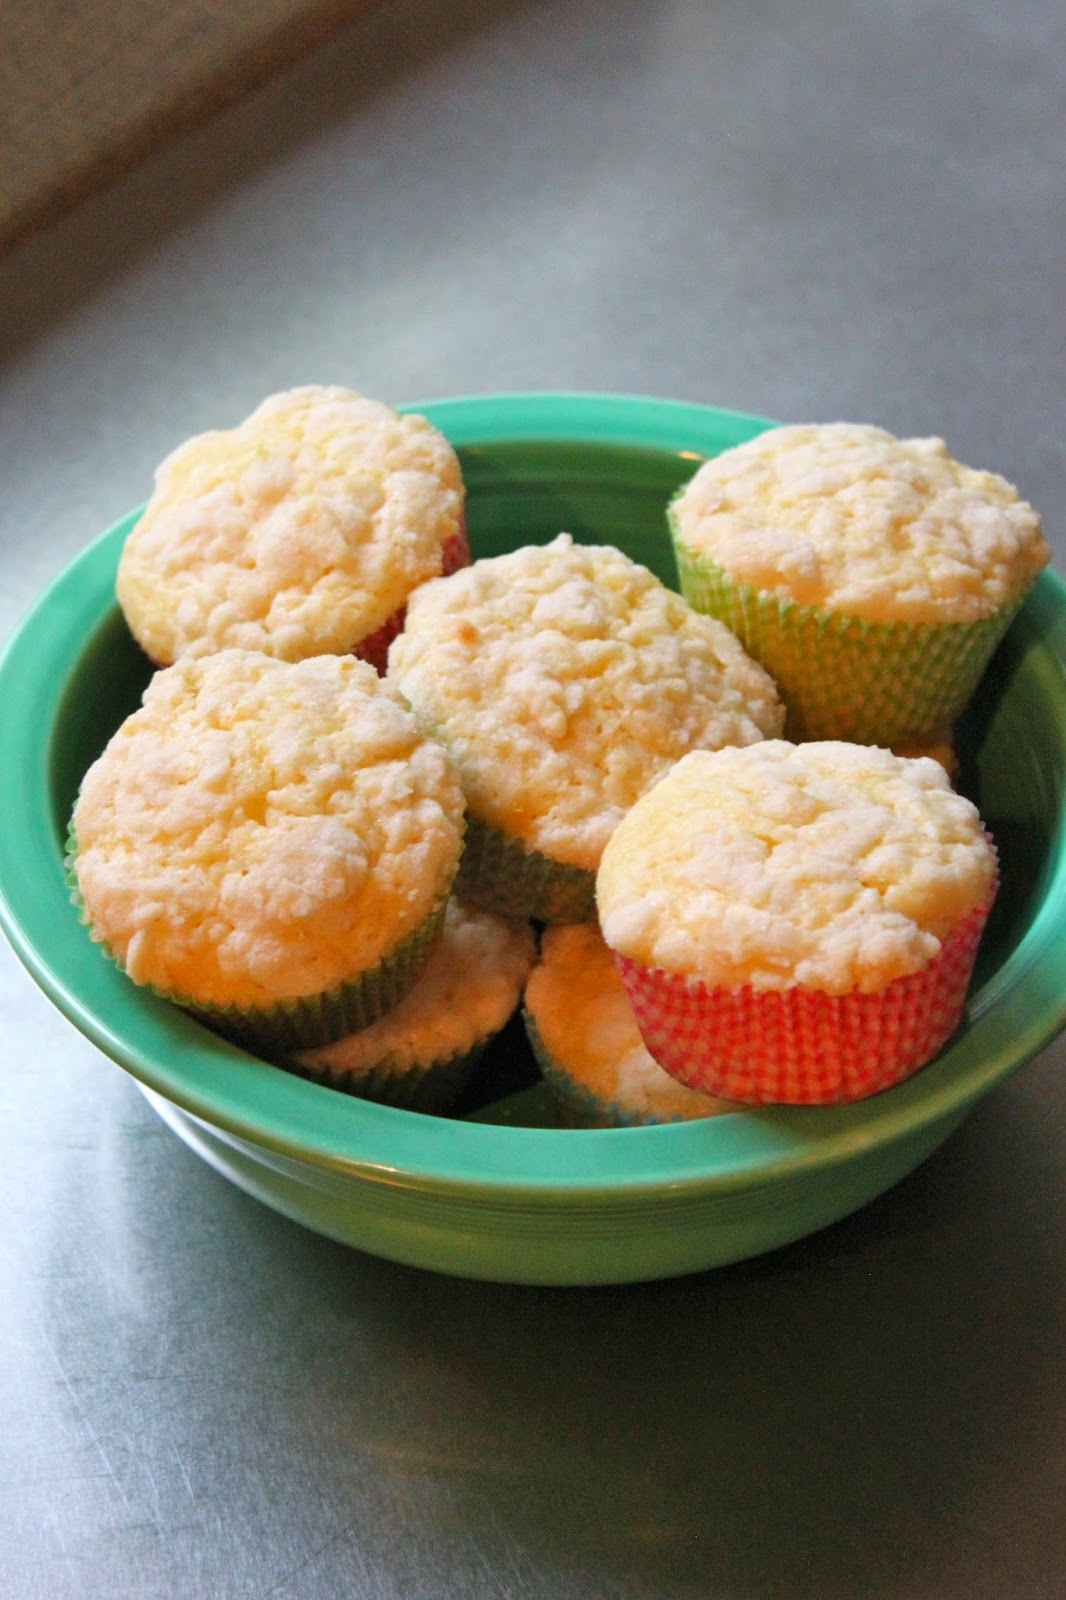 Baked Perfection: Lemon Crumb Muffins and a New Addition